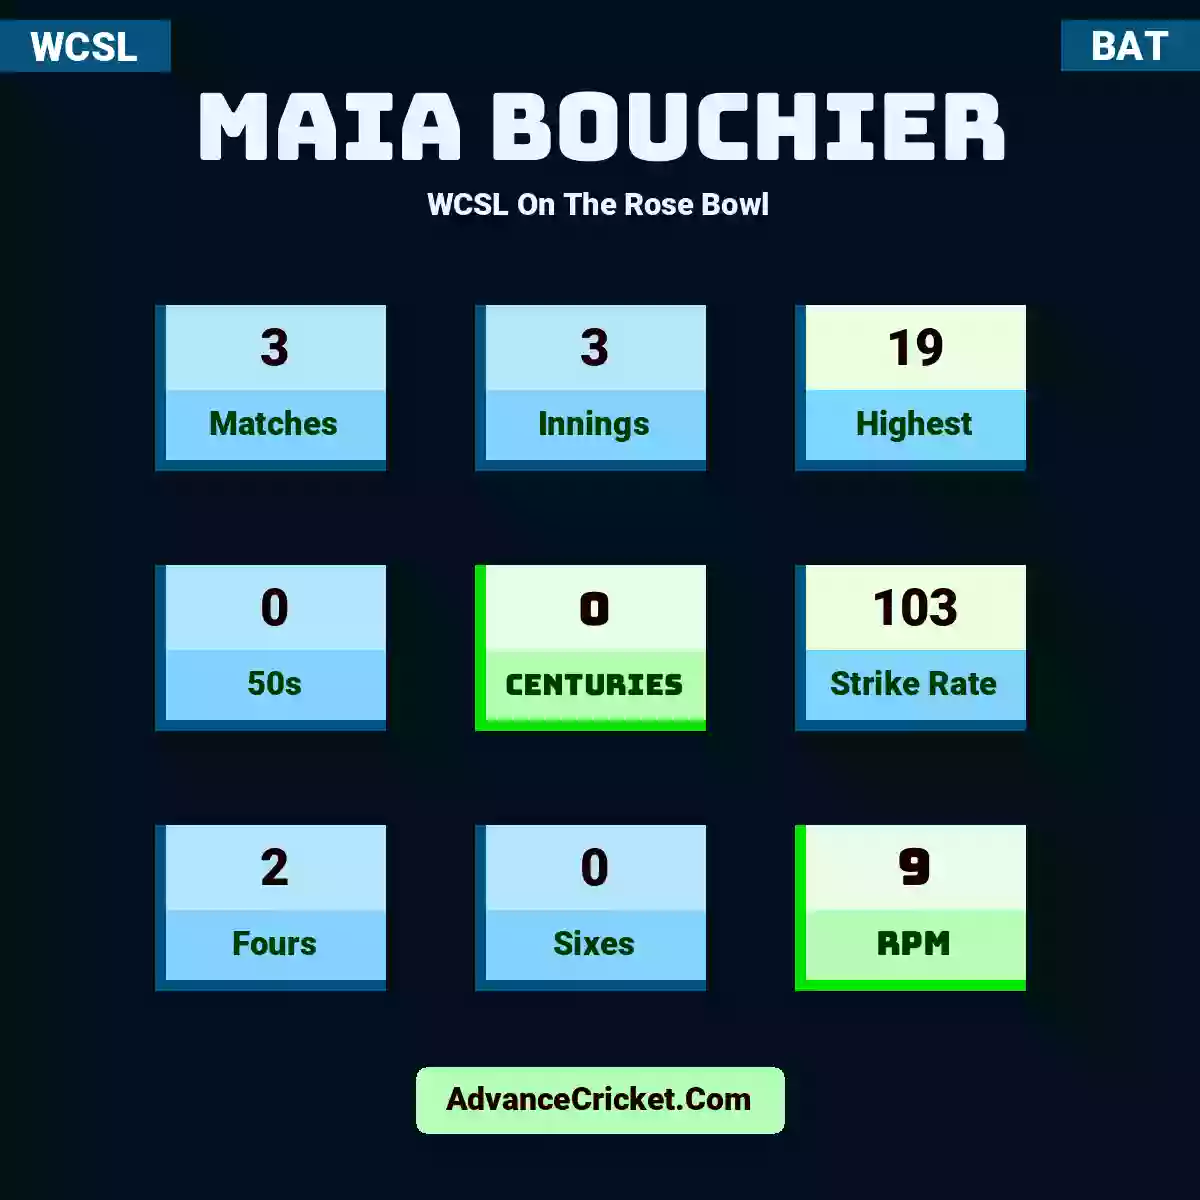 Maia Bouchier WCSL  On The Rose Bowl, Maia Bouchier played 3 matches, scored 19 runs as highest, 0 half-centuries, and 0 centuries, with a strike rate of 103. M.Bouchier hit 2 fours and 0 sixes, with an RPM of 9.